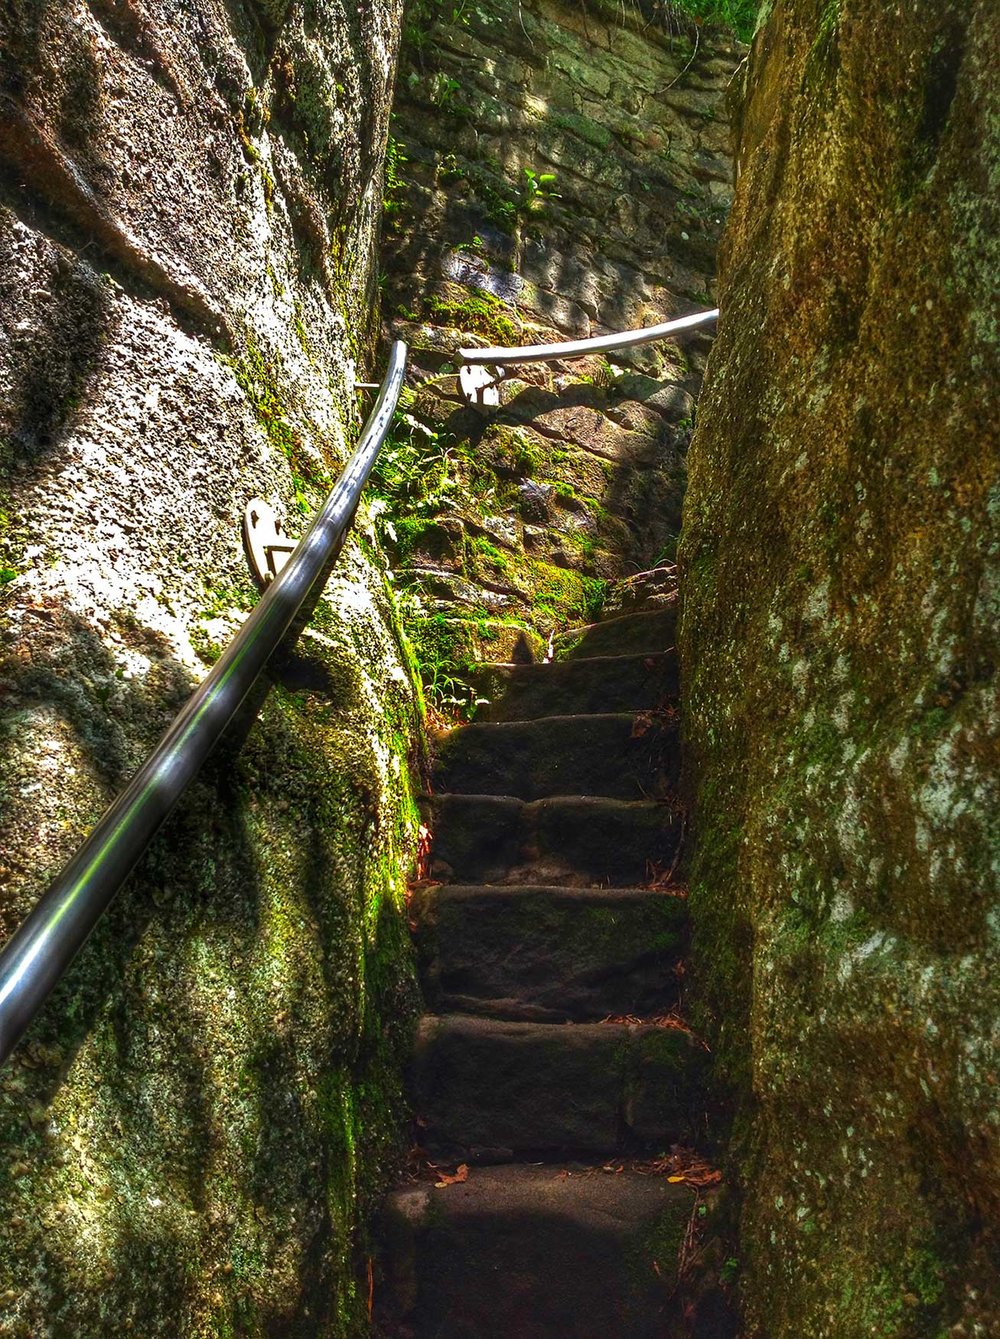 Stairs at Rimrock Trail - Allegheny National Forest